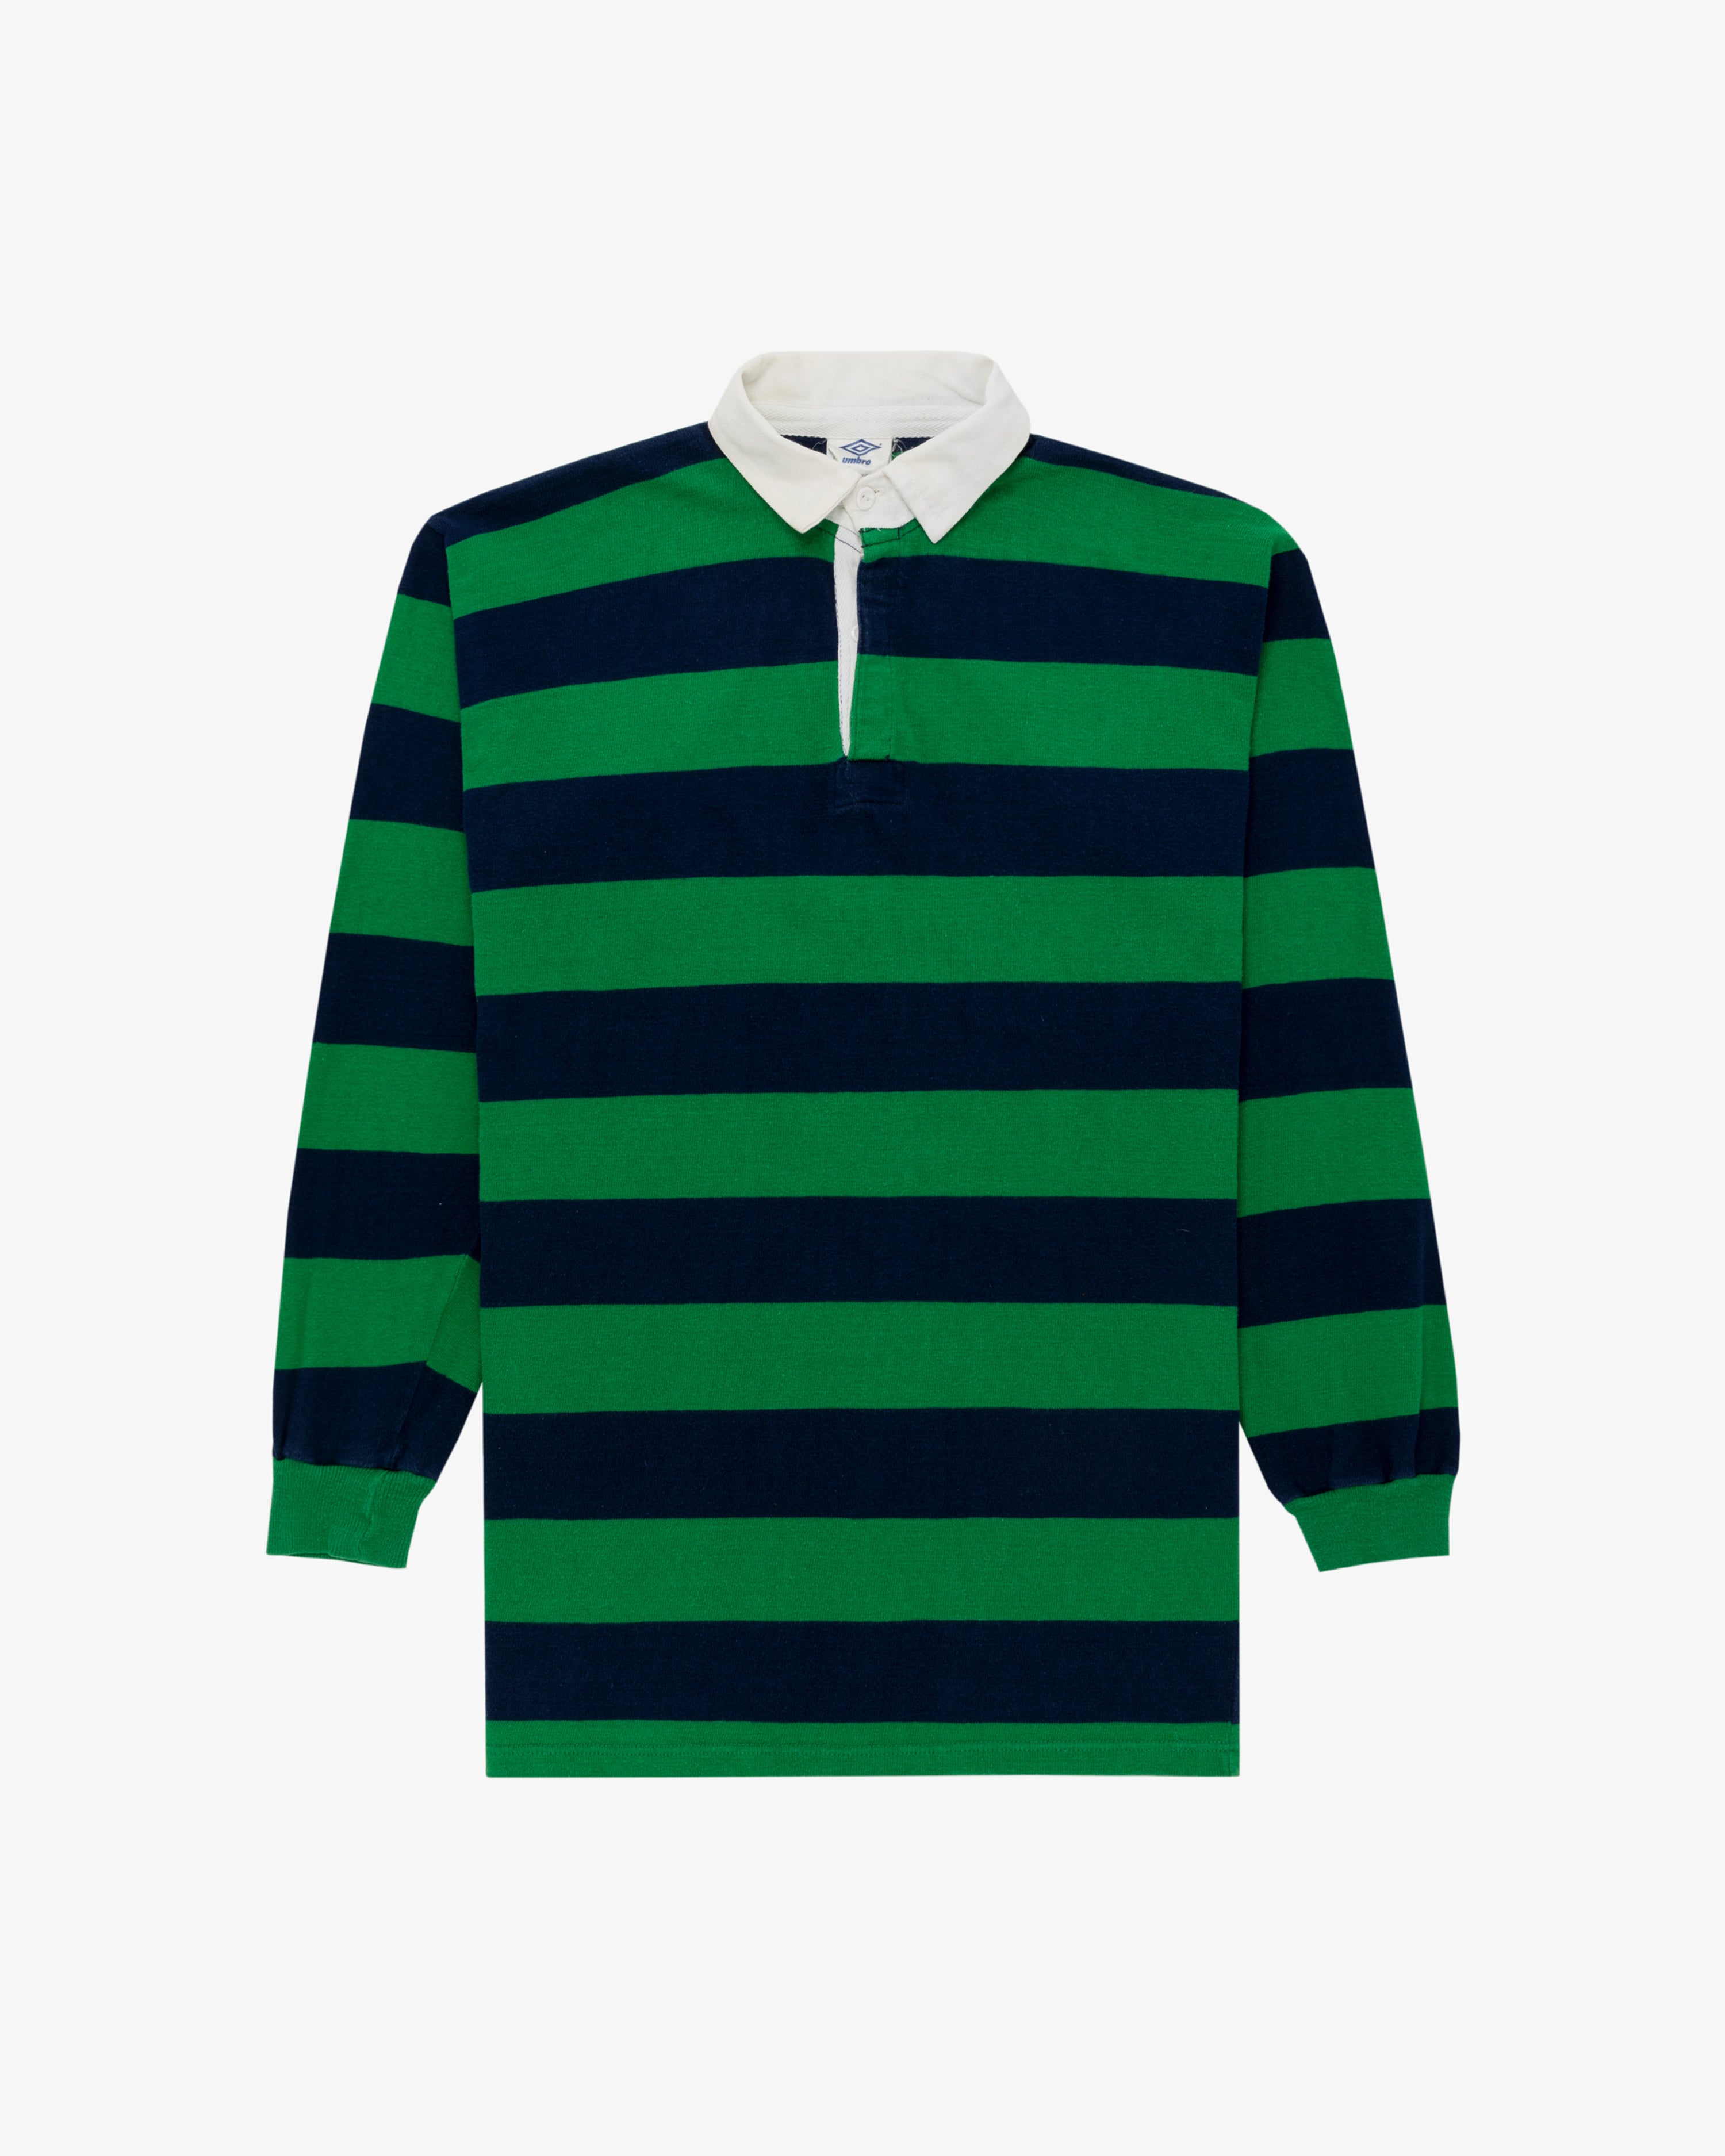 Striped Umbro Rugby Shirt